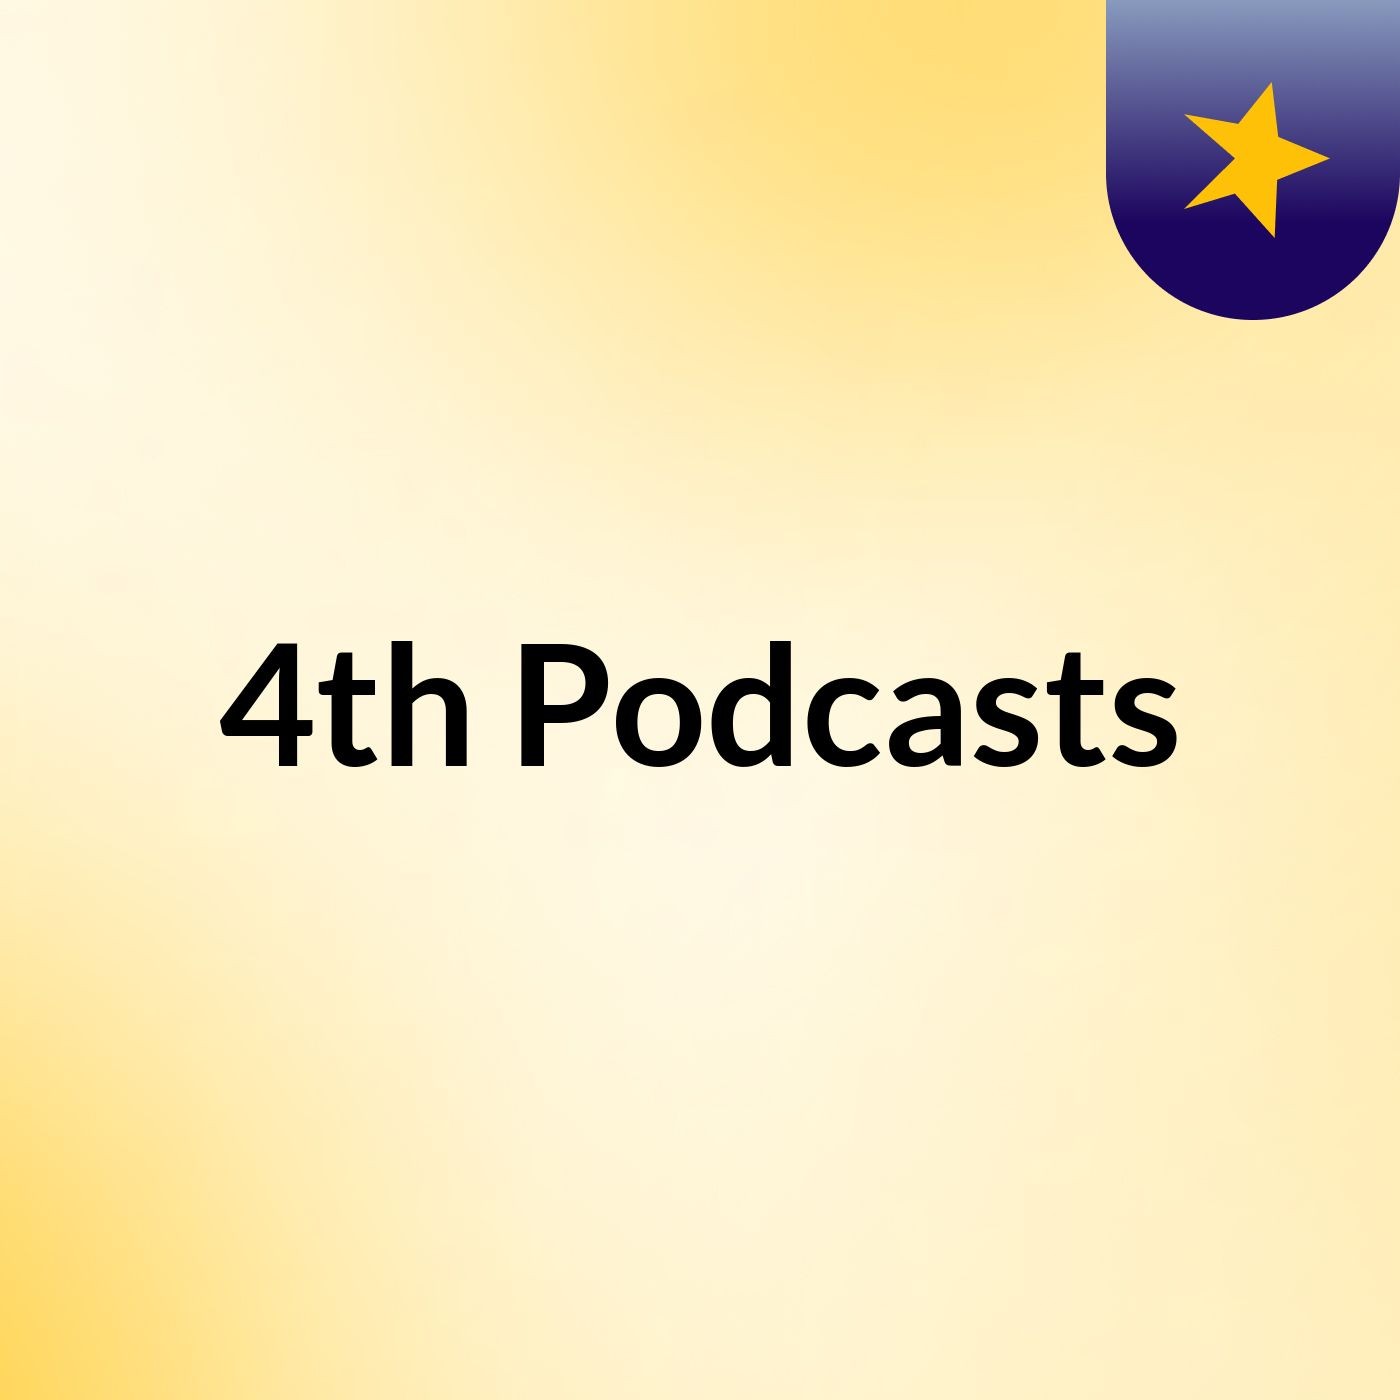 4th Podcasts